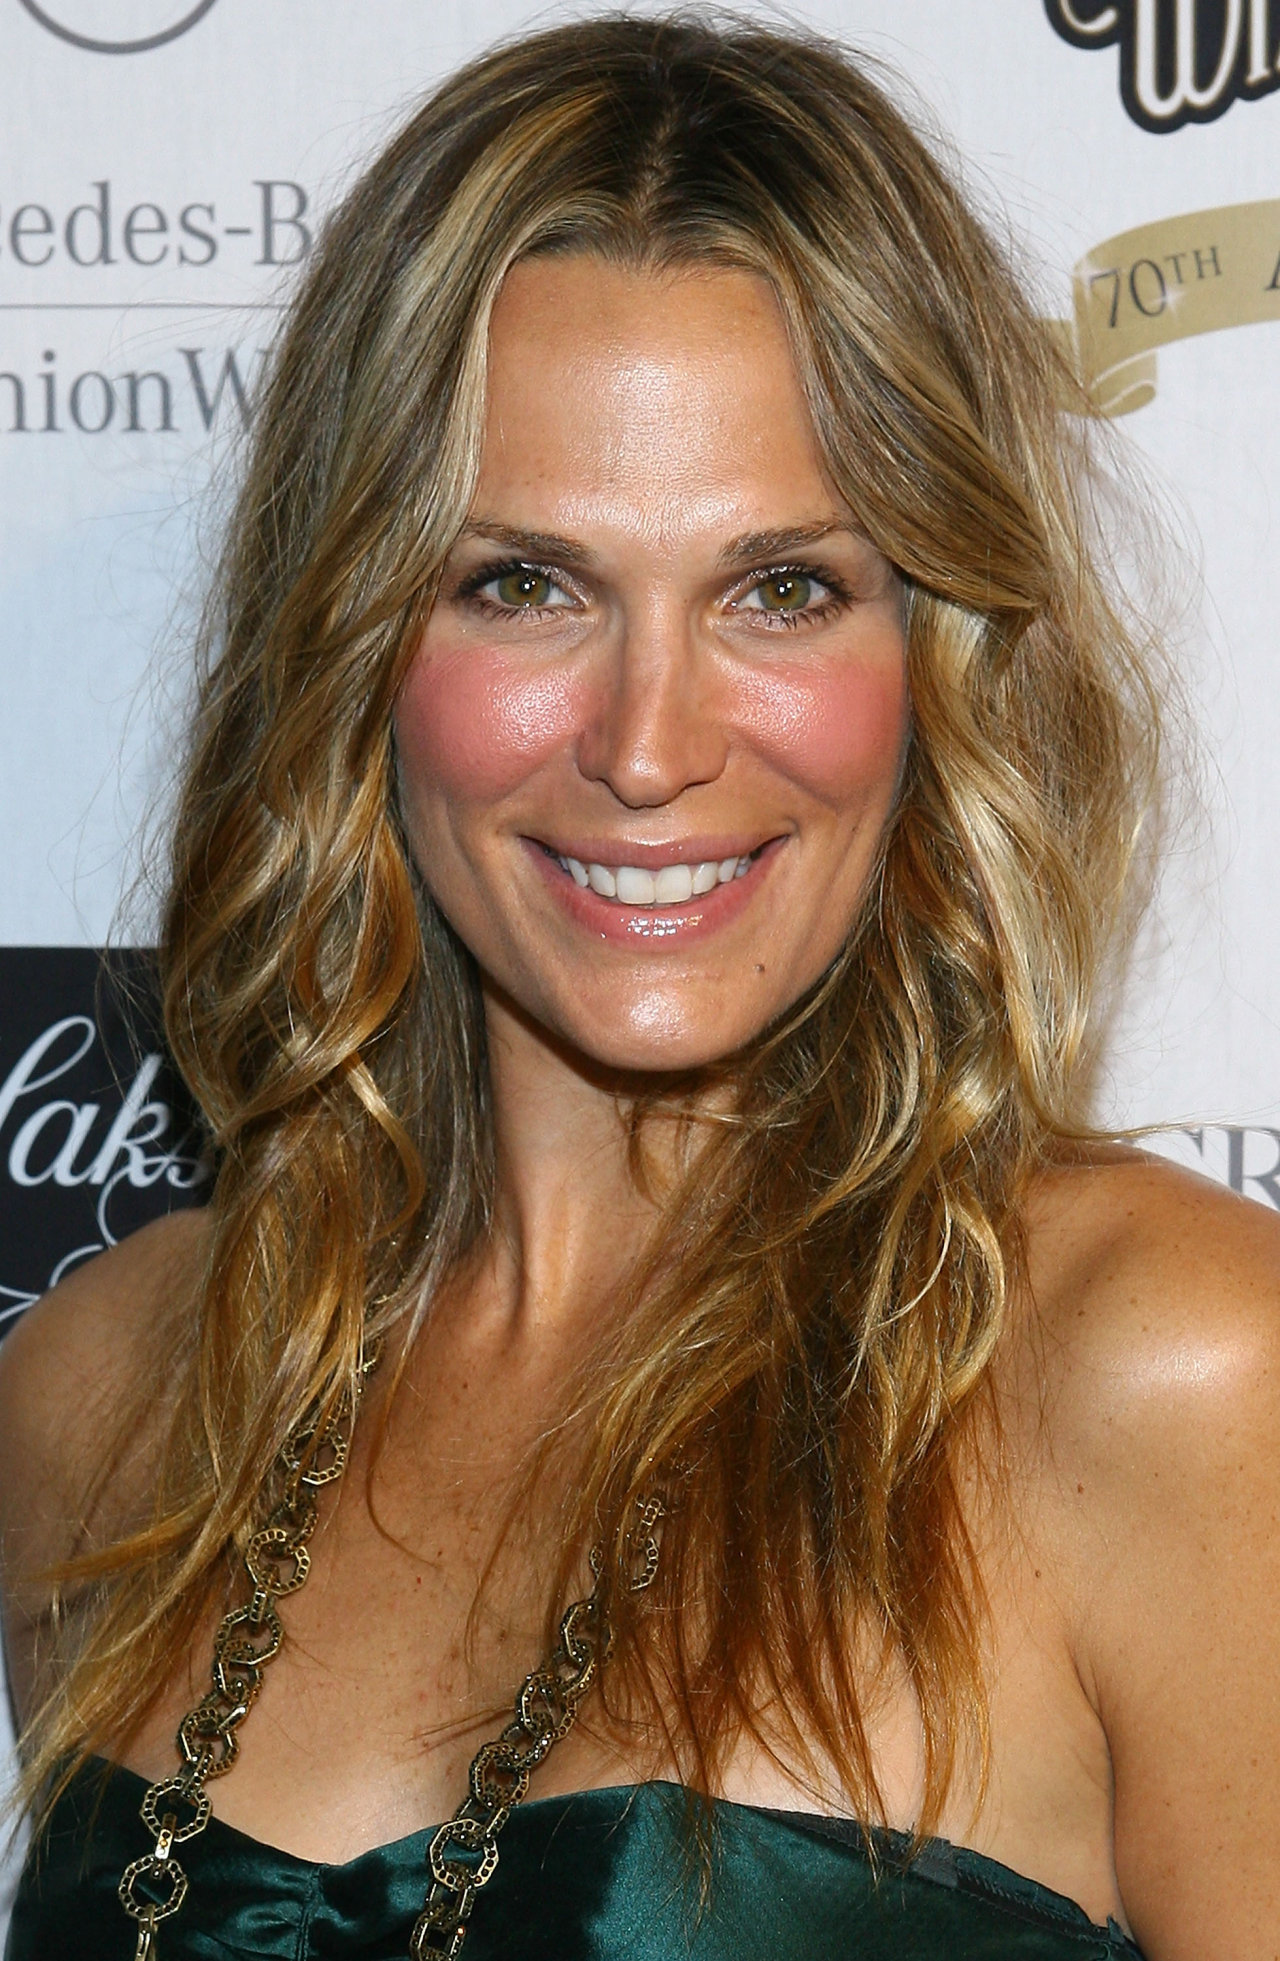 Molly Sims leaked wallpapers